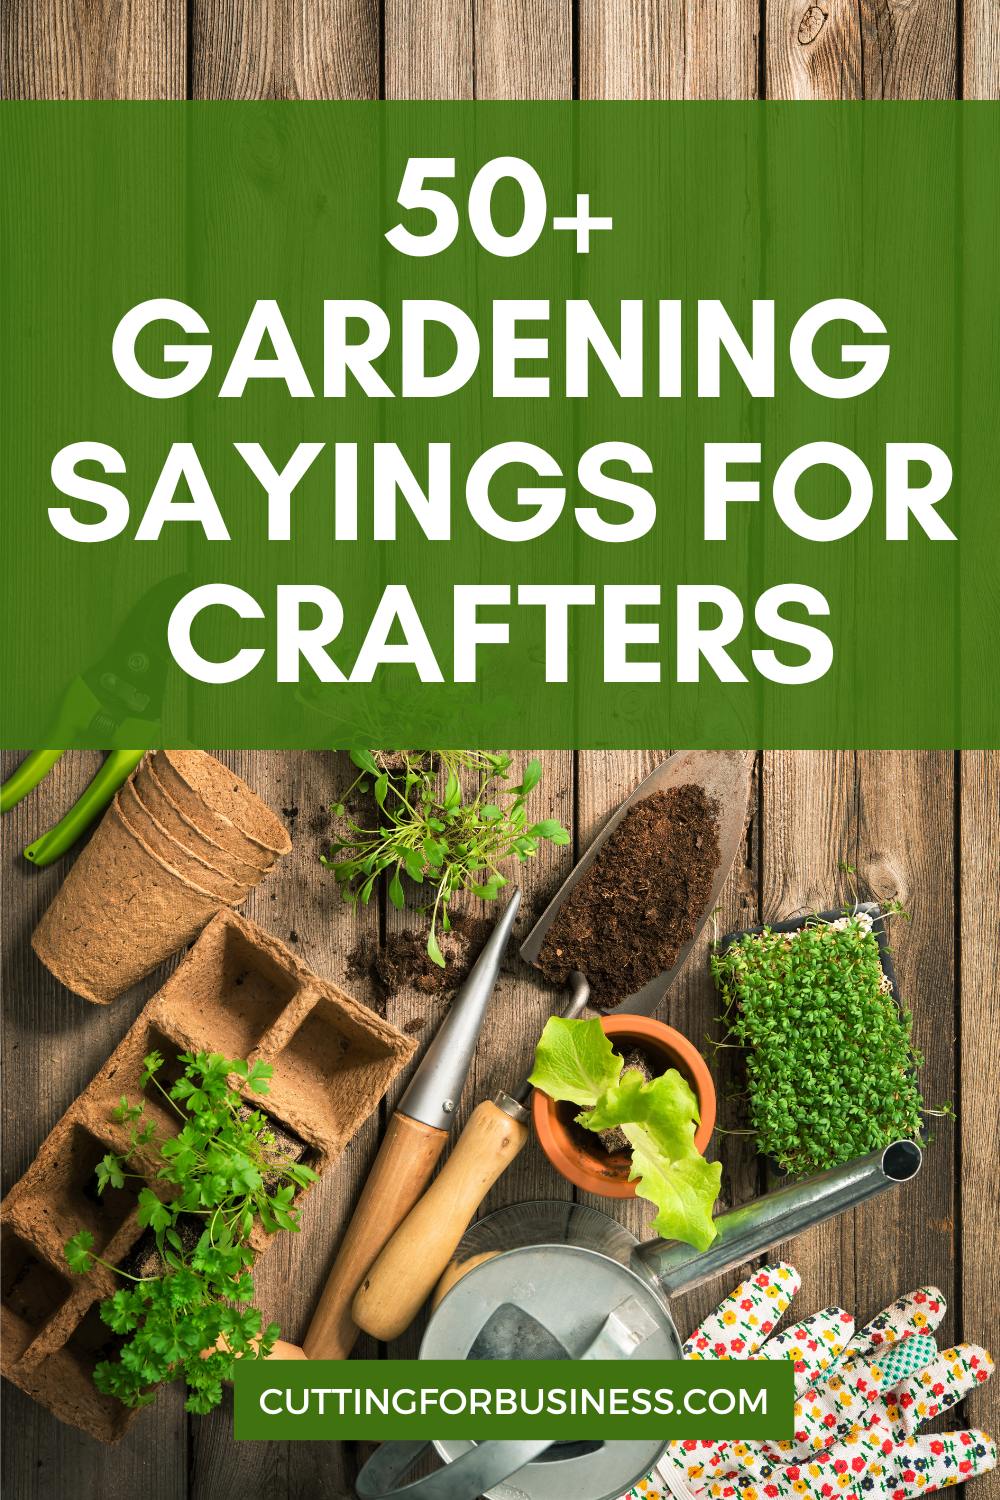 50+ Gardening Sayings for Crafters to use on cards, shirts, wood signs, decals, and more - cuttingforbusiness.com.